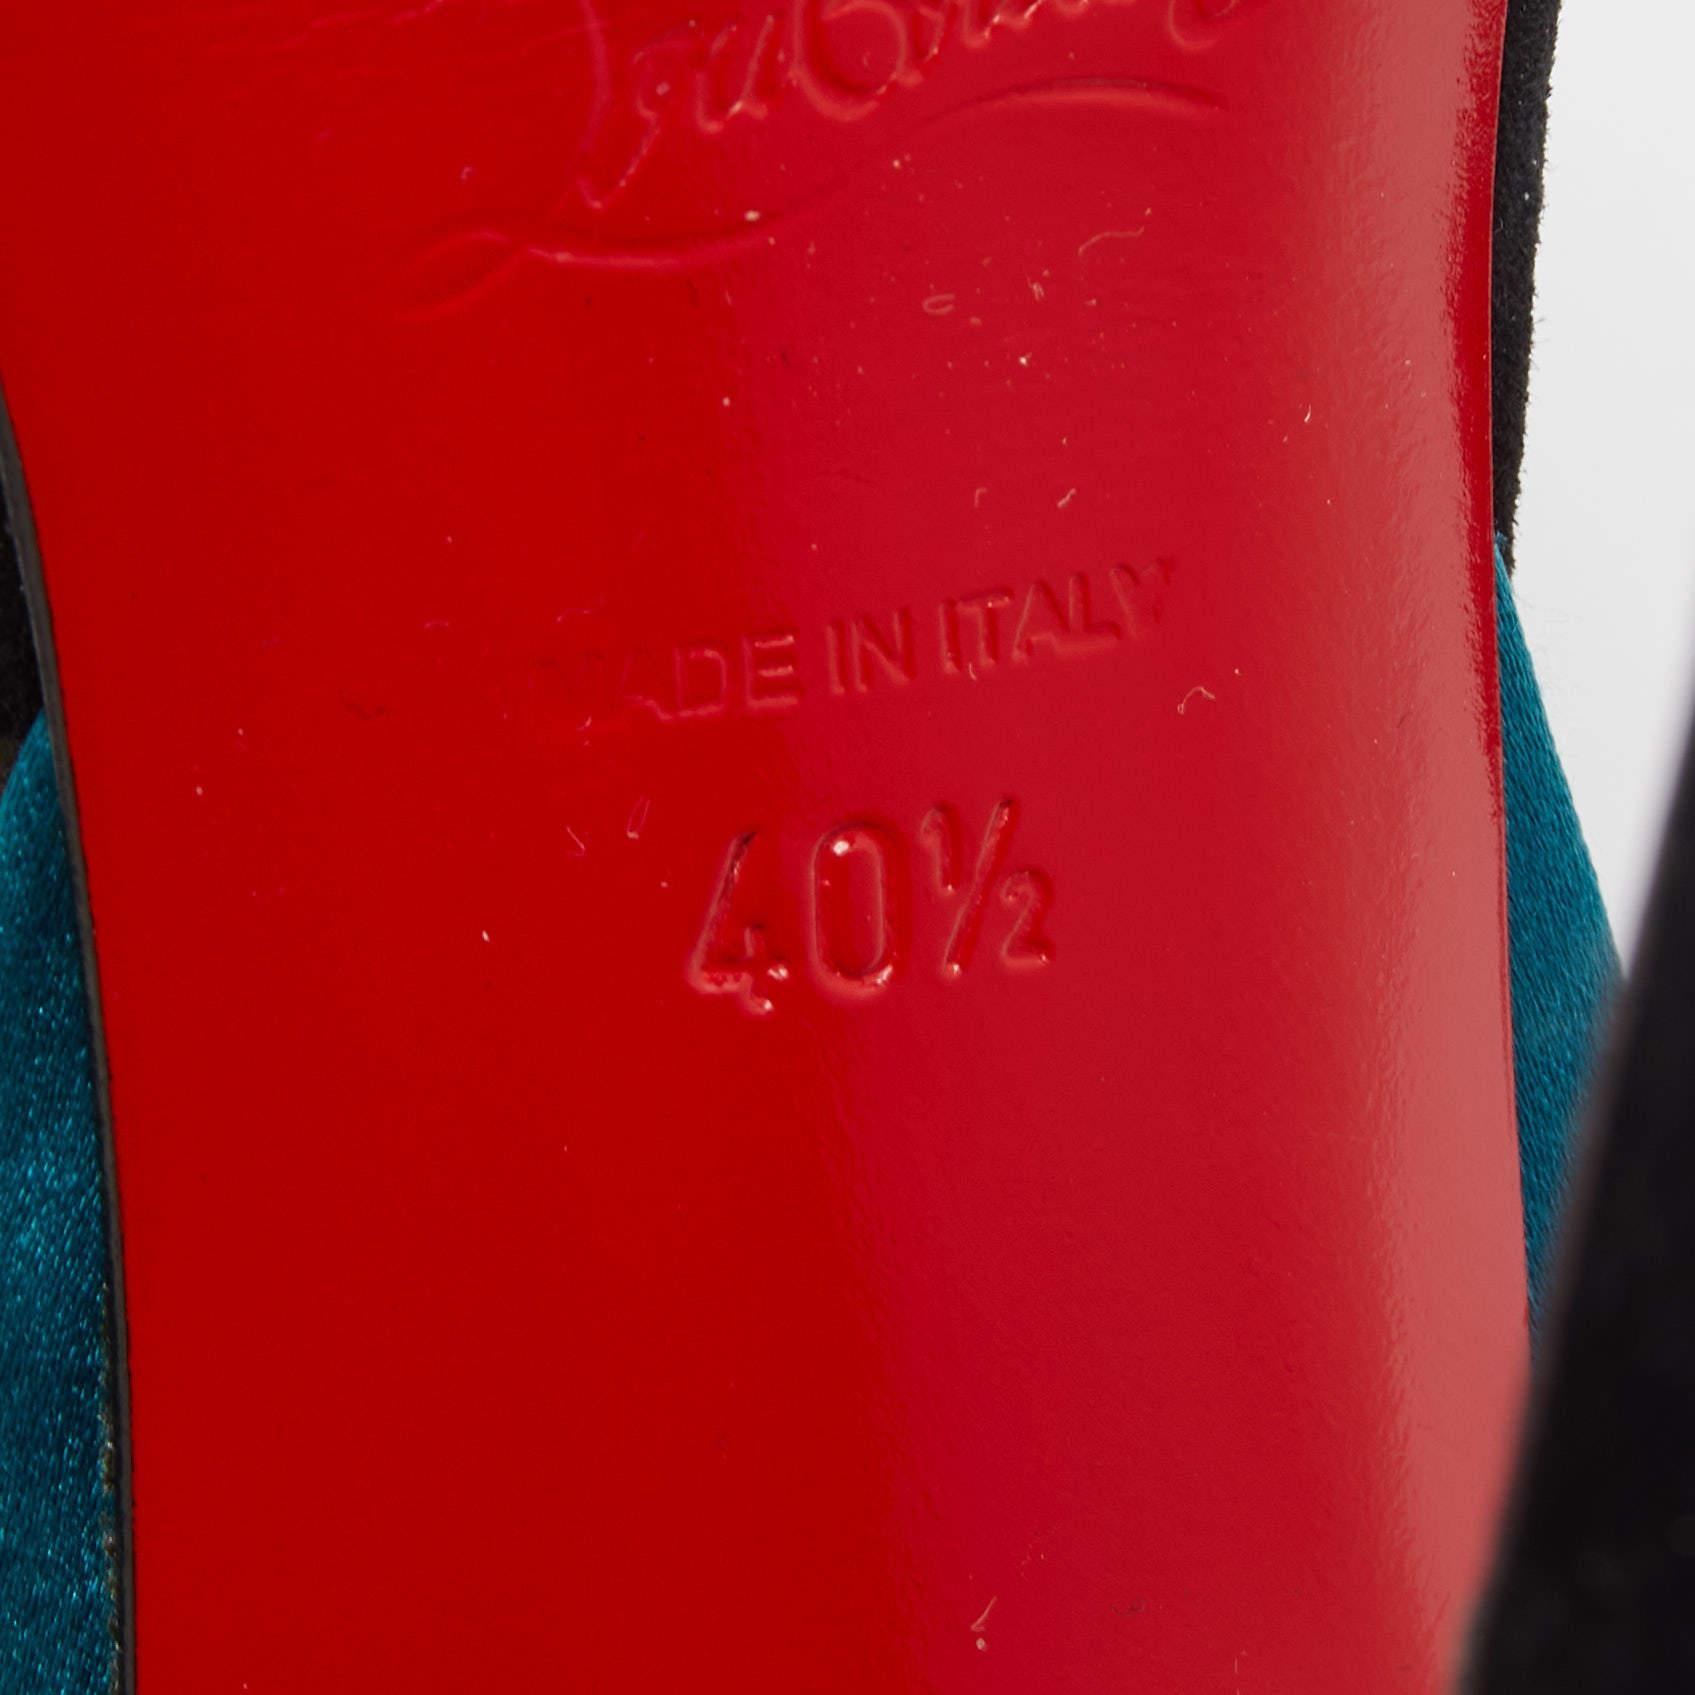 Christian Louboutin Teal/Black Satin and Suede Vampanodo Sandals Size 40.5 1